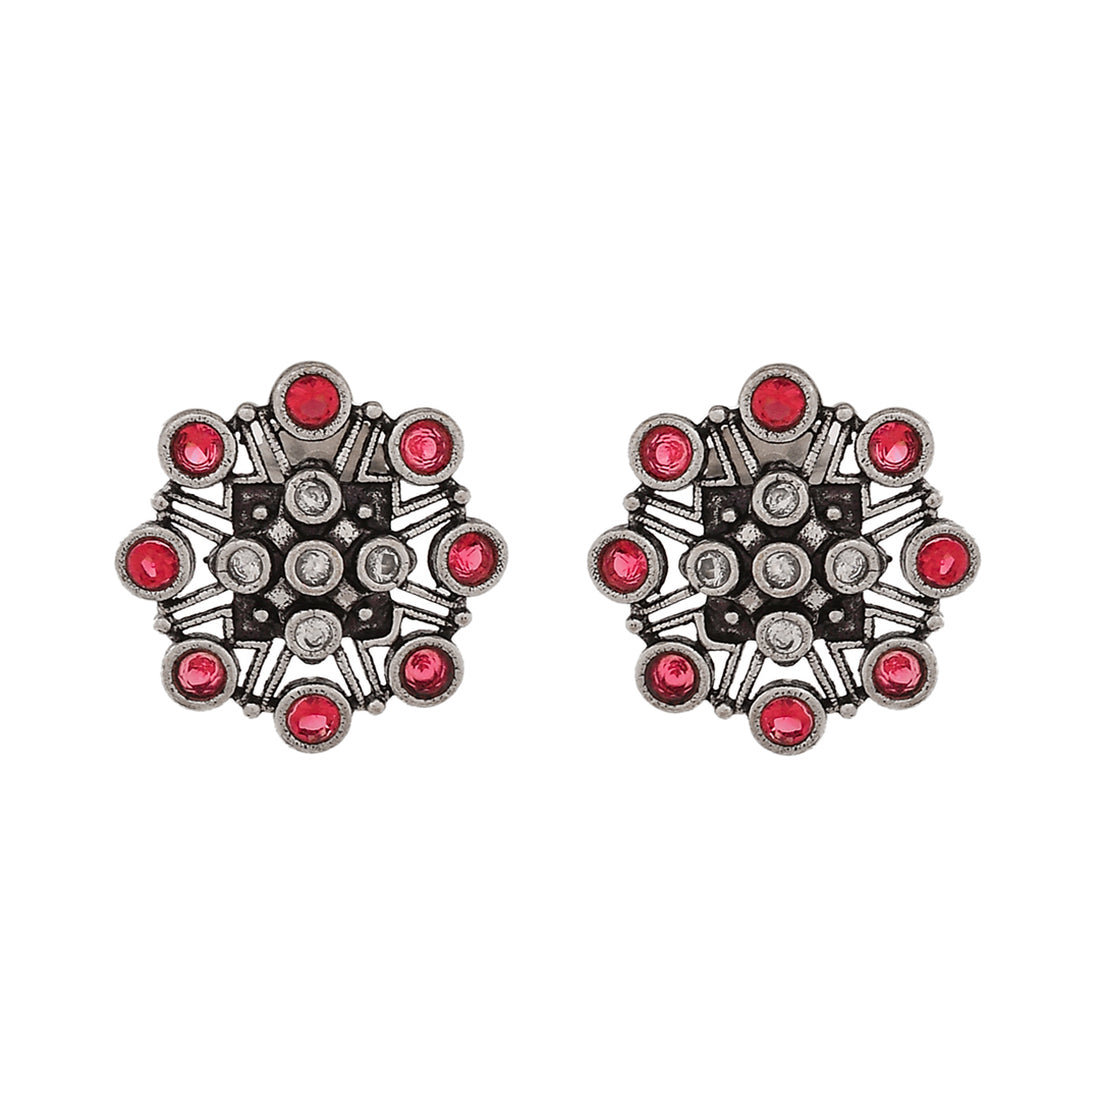 Women's Abharan White And Red Round Cut Stones Stud Earrings - Voylla